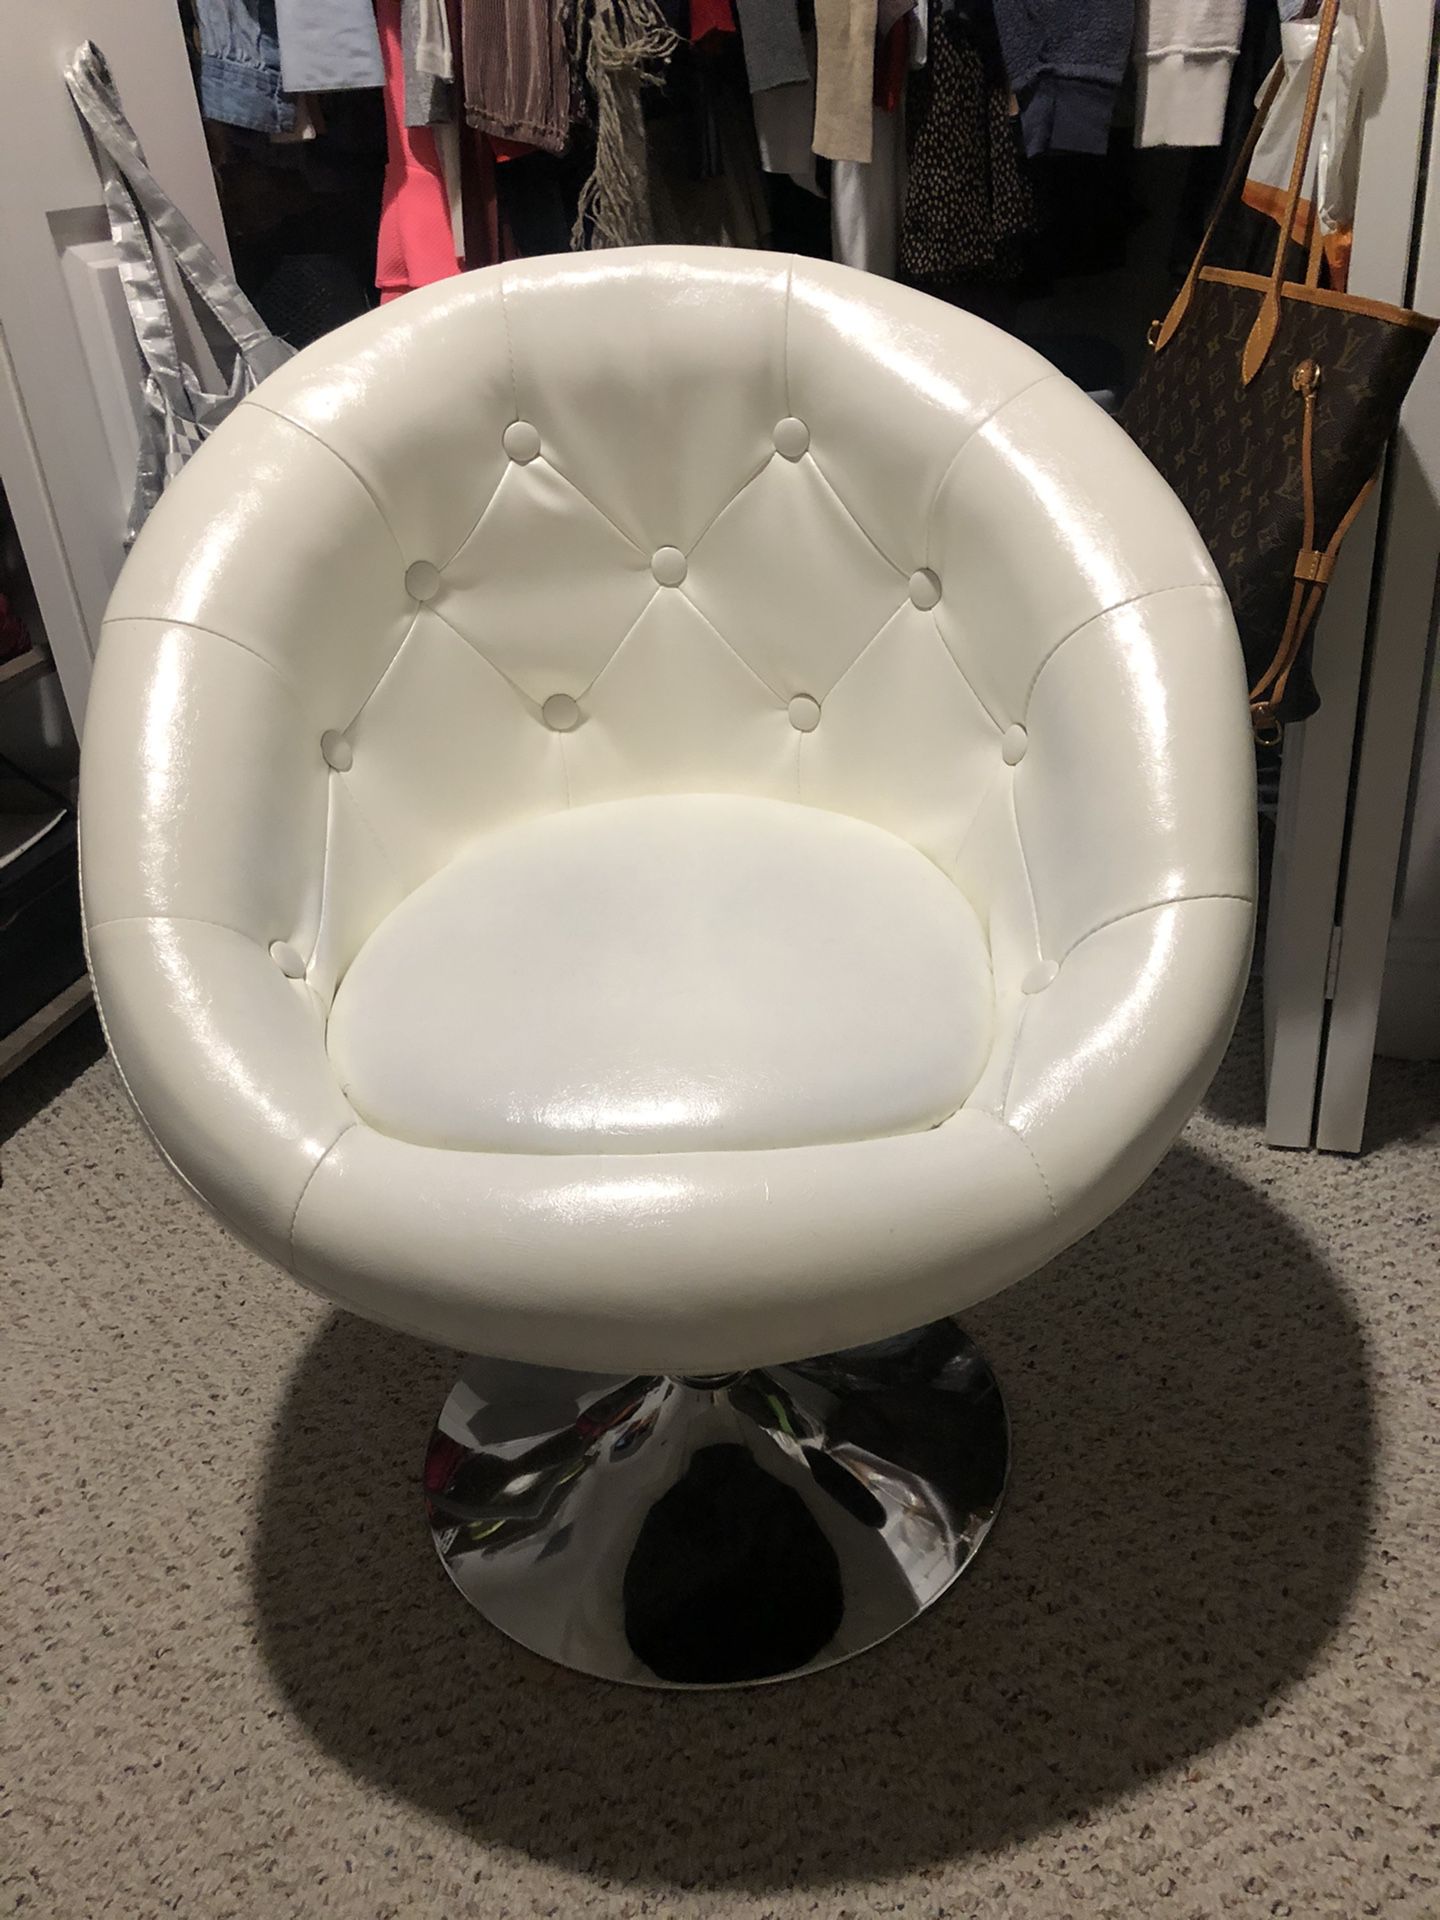 Swivel Chair - Used but like new.